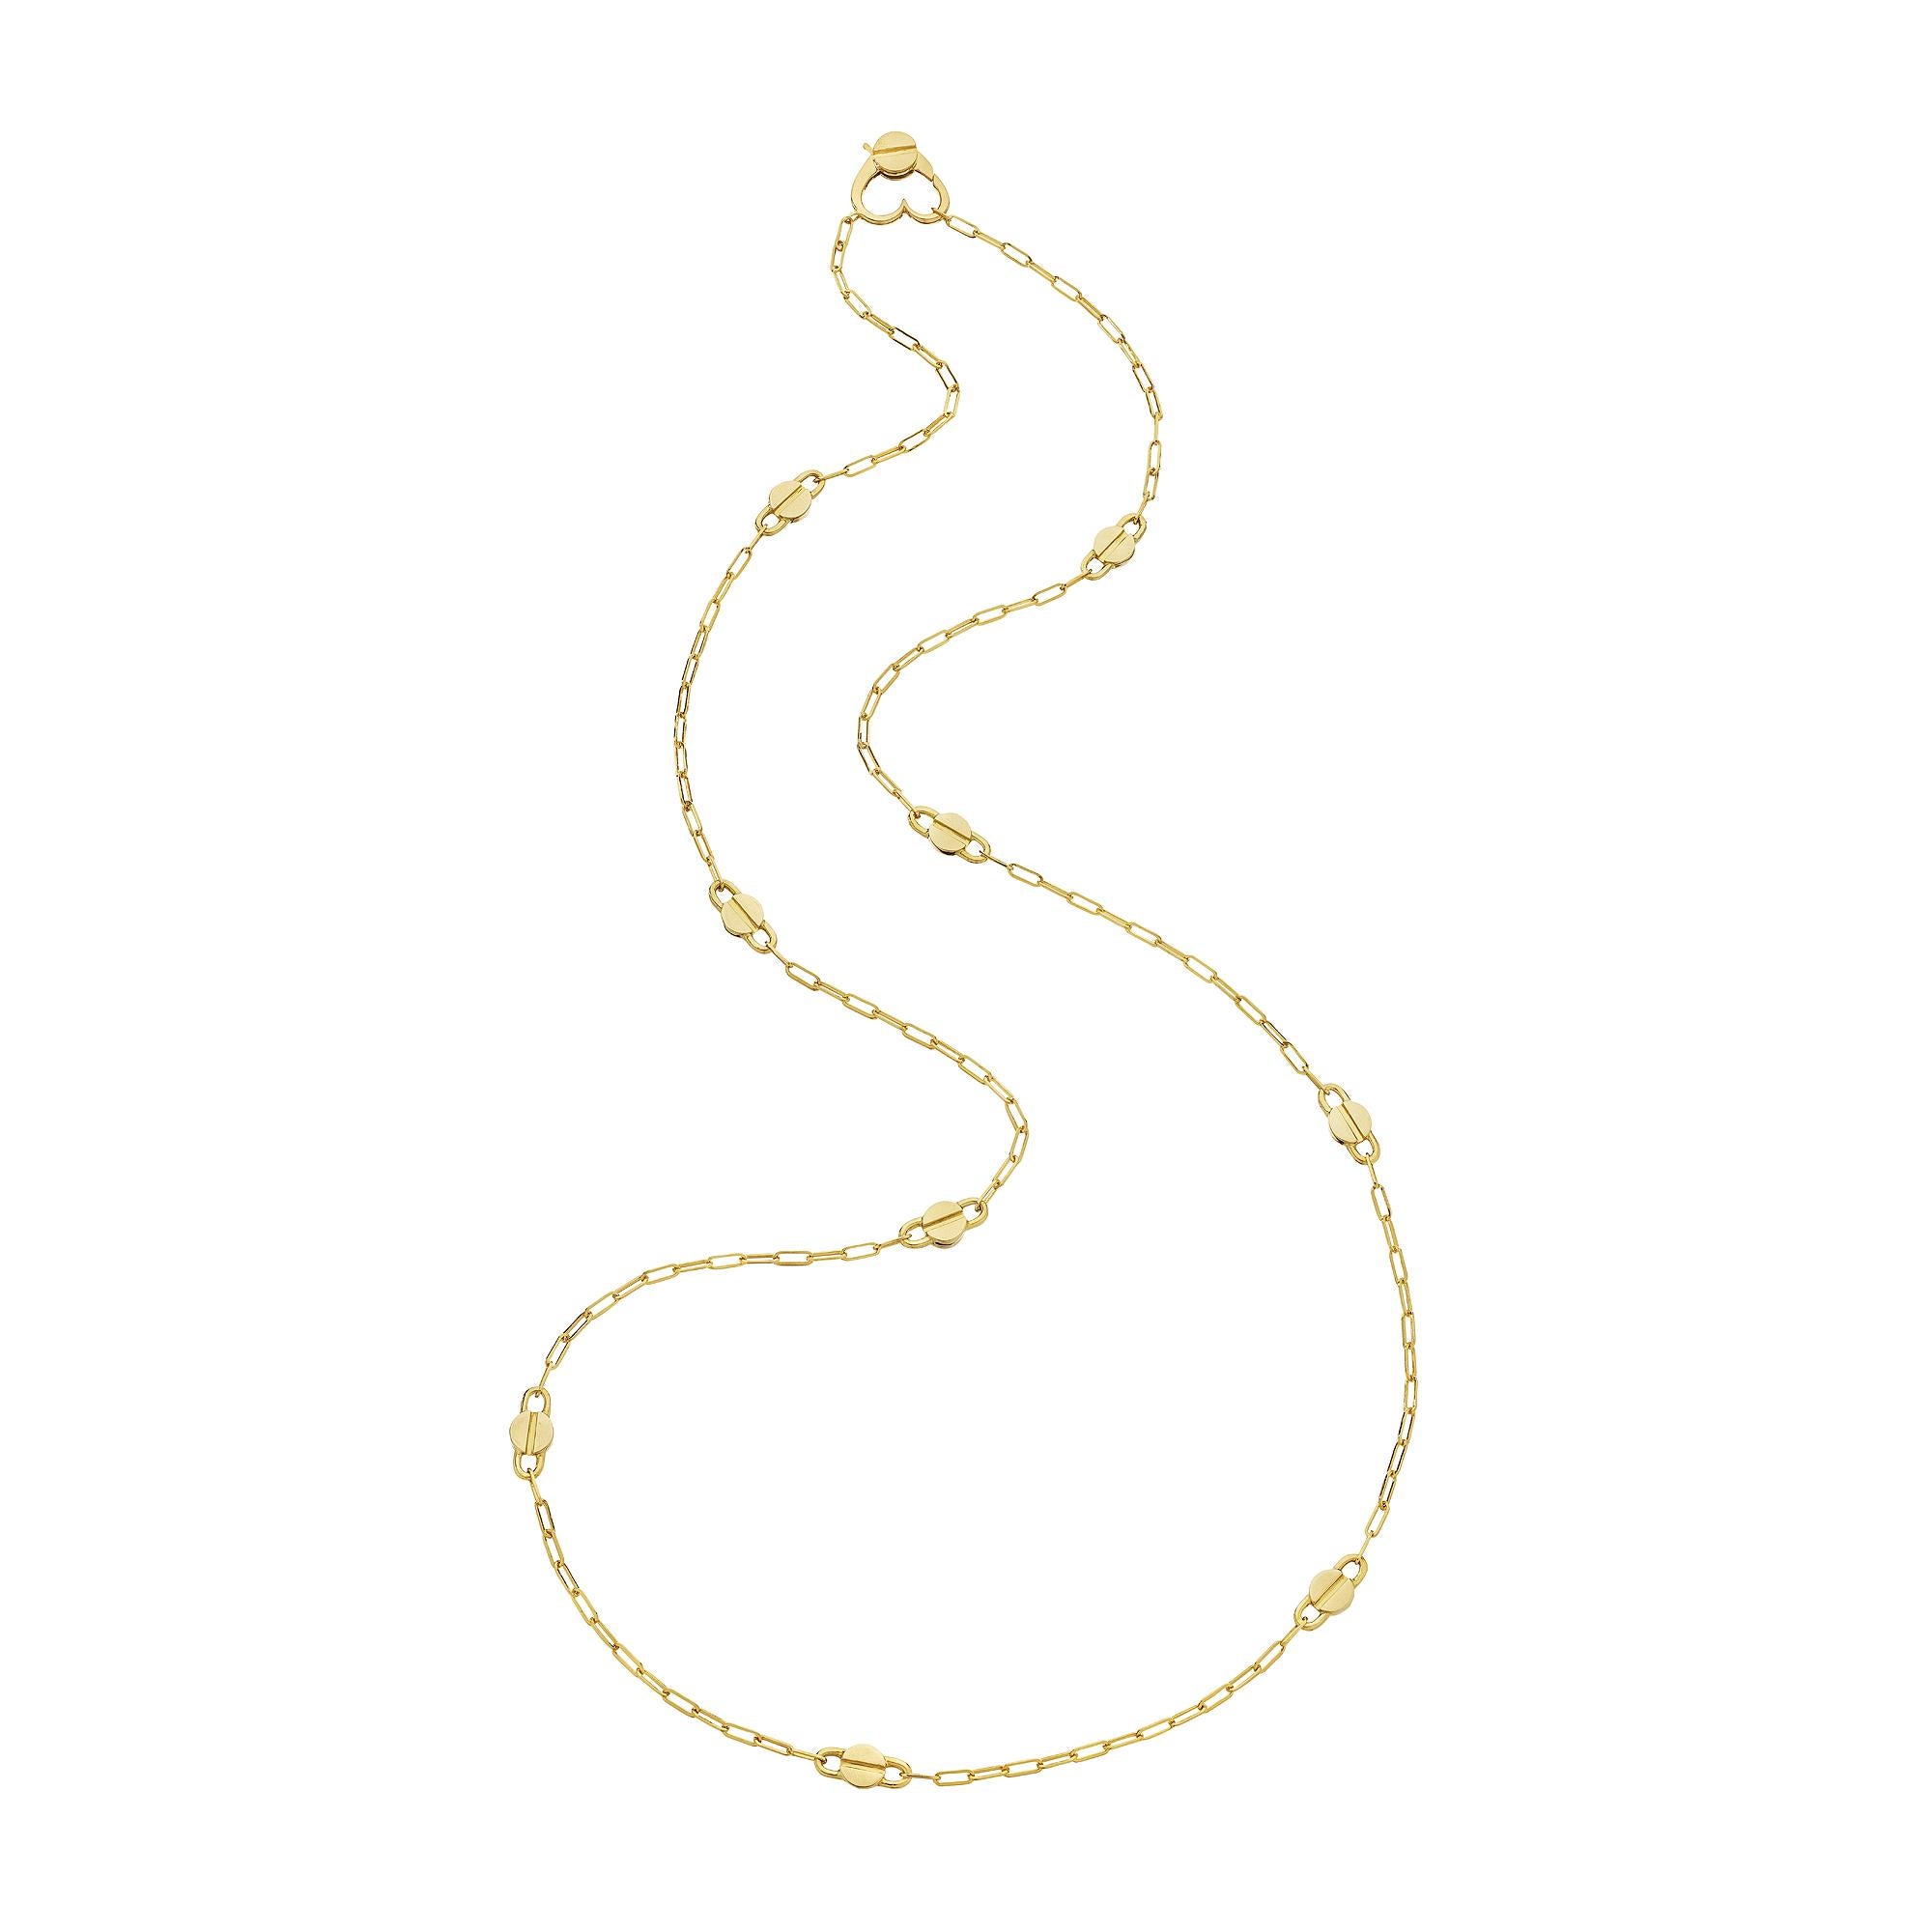 Wear your love on a chain for all to see with this Aldo Cipullo iconic link modernist 18 karat gold 36